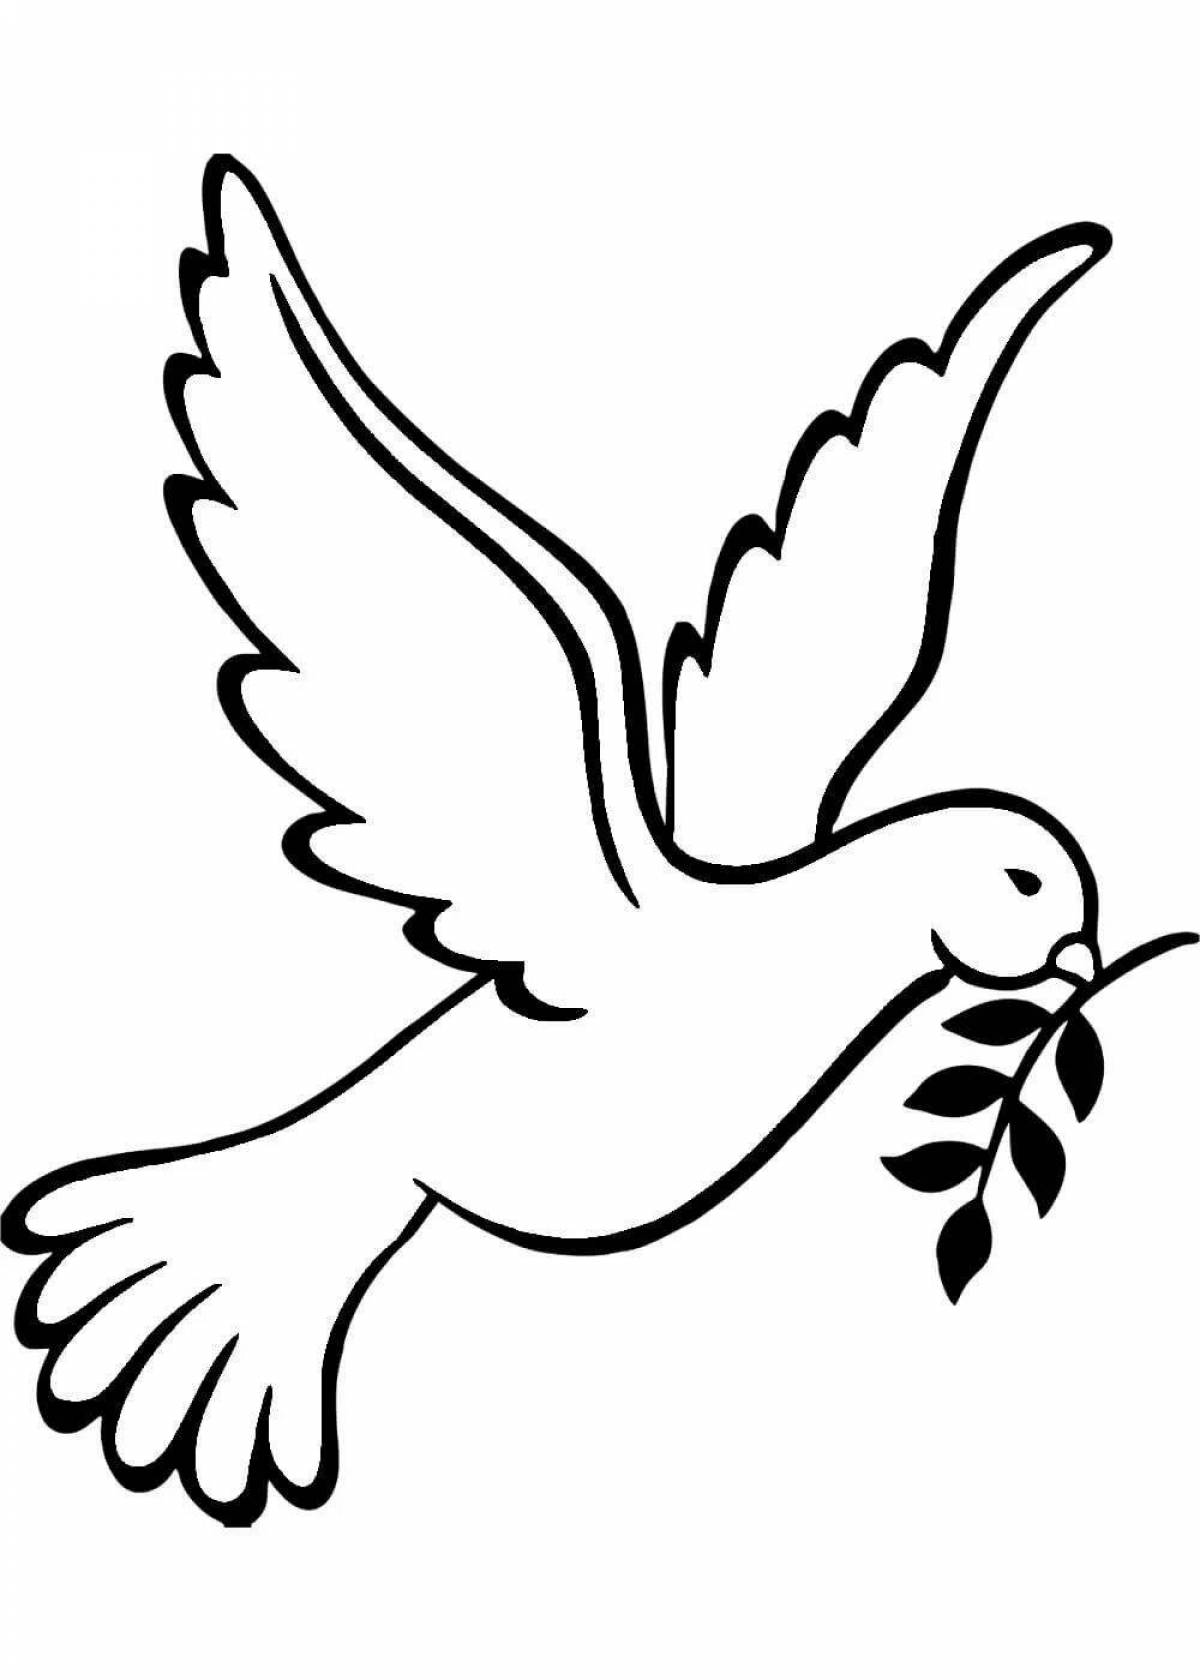 Gorgeous dove of peace coloring book for kids